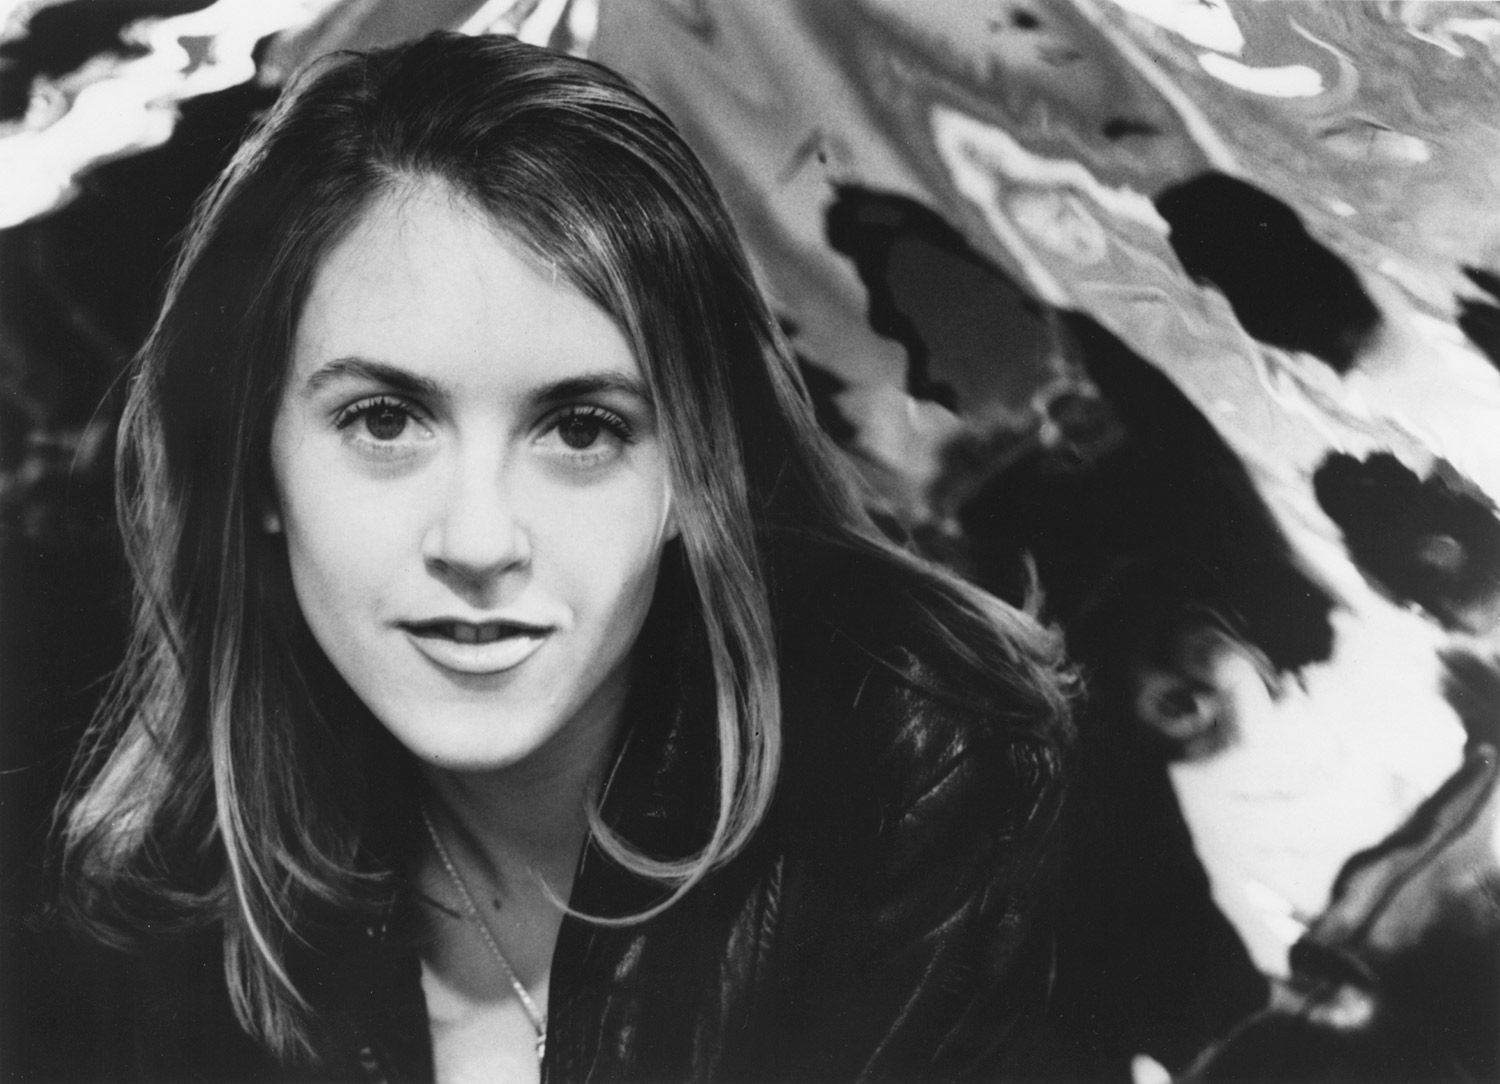 Publicty photo of Liz Phair in 1993. Photo by Robert Manella.